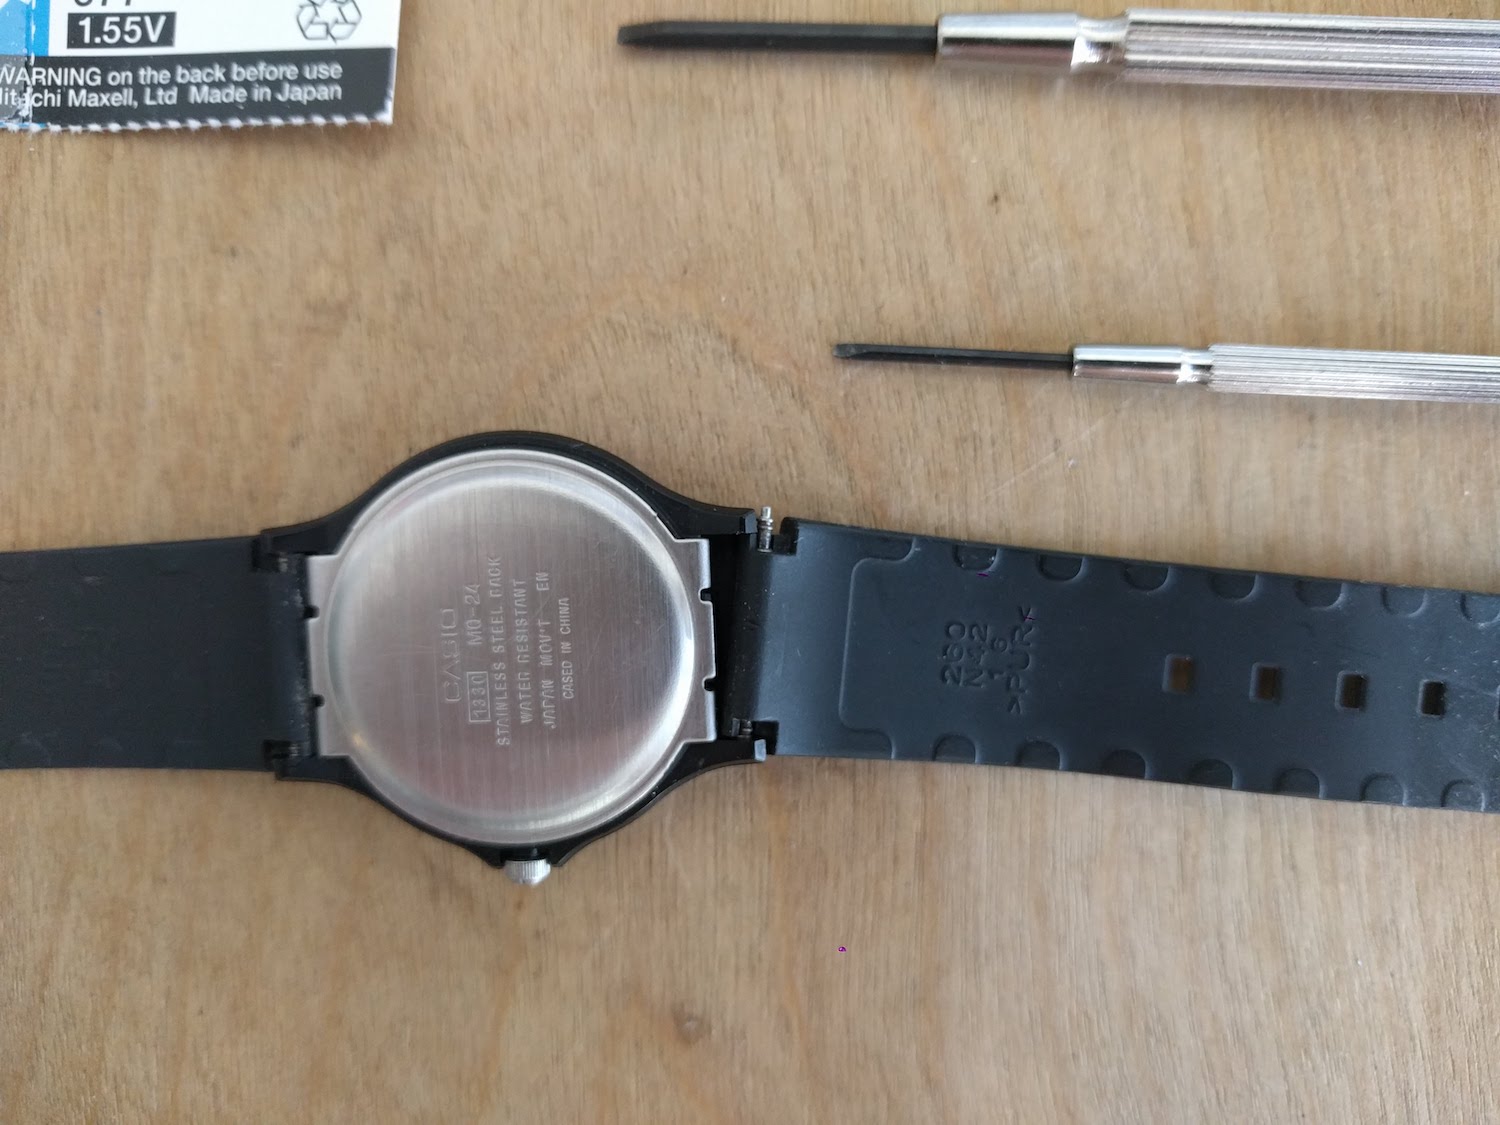 Casio series watch battery replacement Jeff Werner